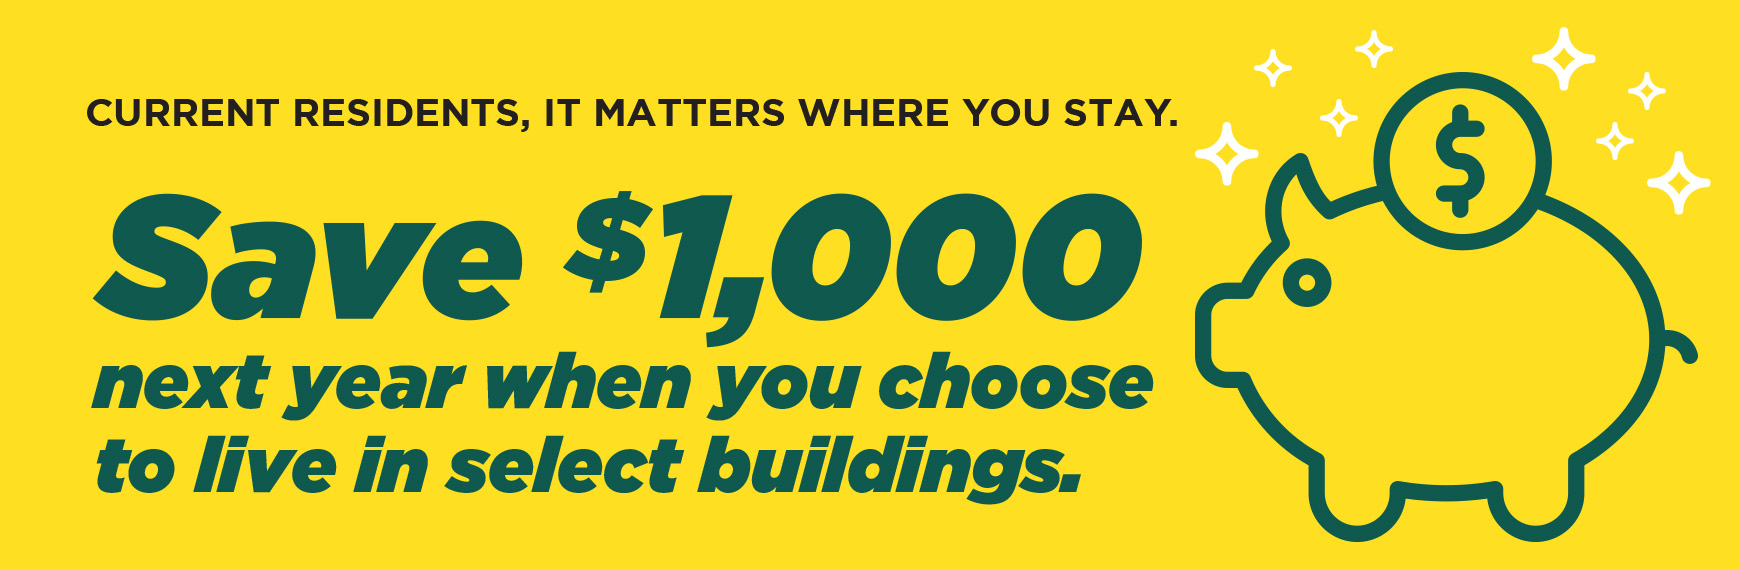 Save $1,000 next year when you choose to live in select buildings.